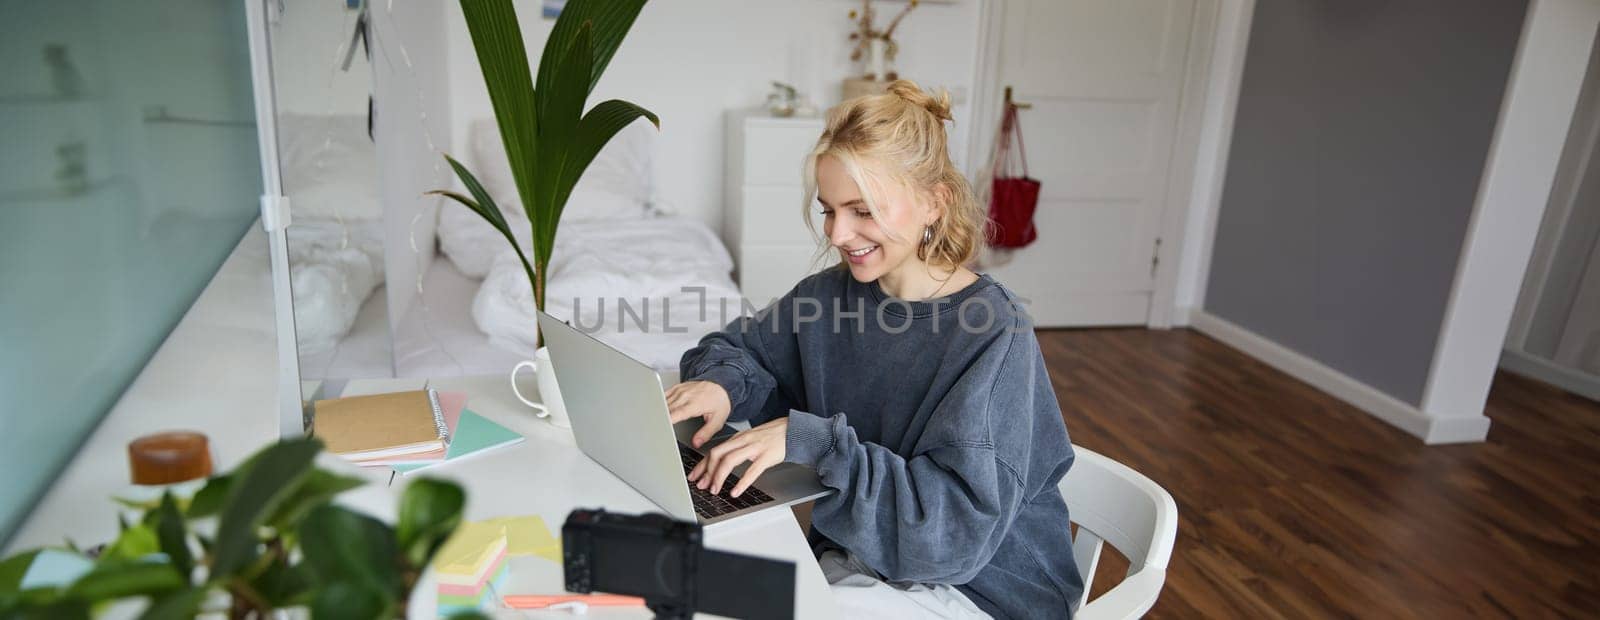 Portrait of woman sitting at desk with laptop, recording video of herself on laptop, making lifestyle video for social media account by Benzoix